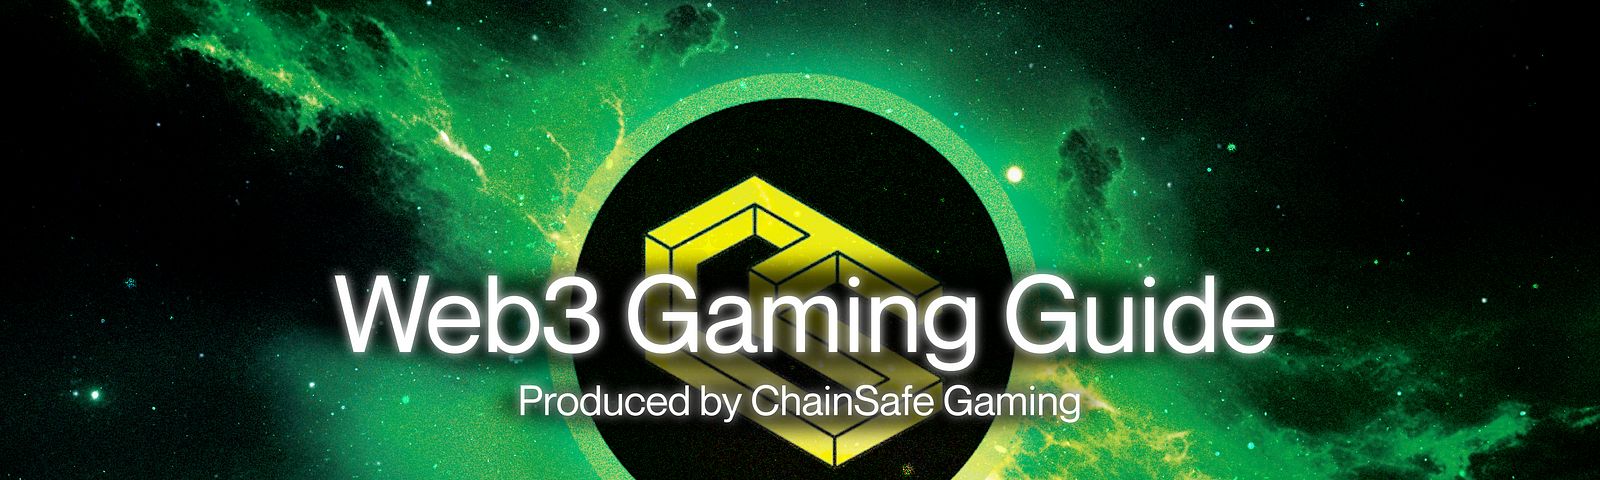 Web3 Gaming Guide — ChainSafe logo on a green astral background